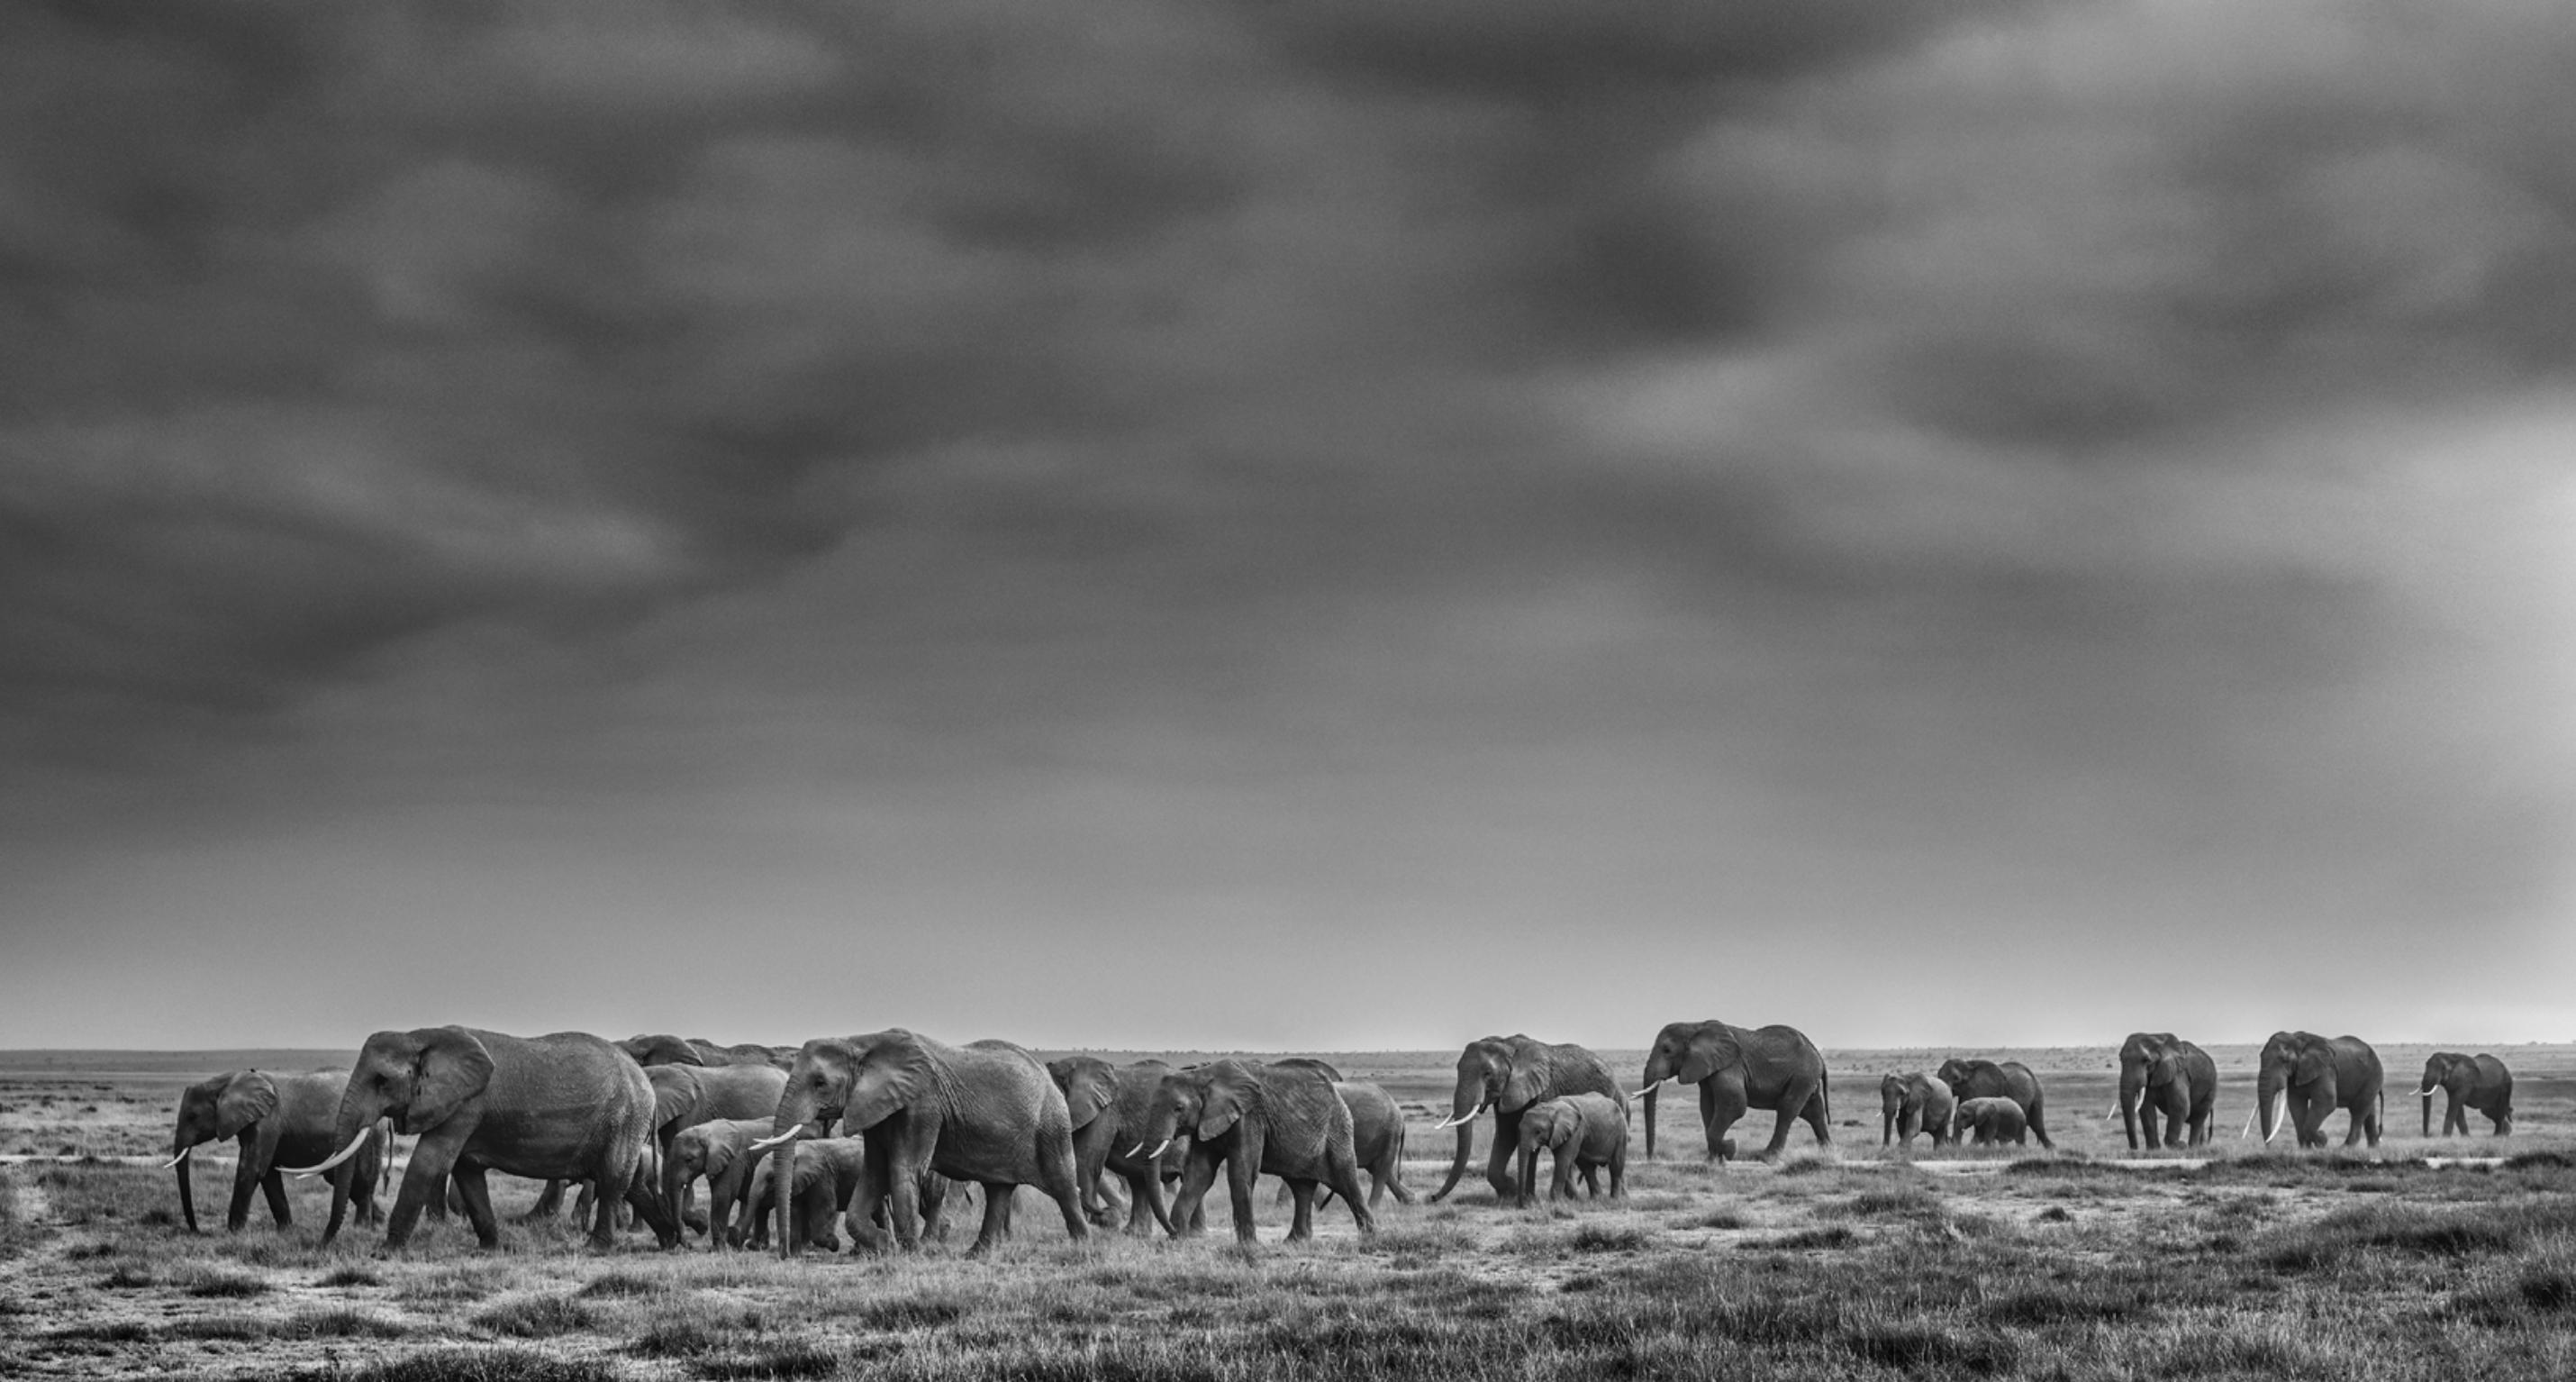 David Yarrow Black and White Photograph - We Are Family